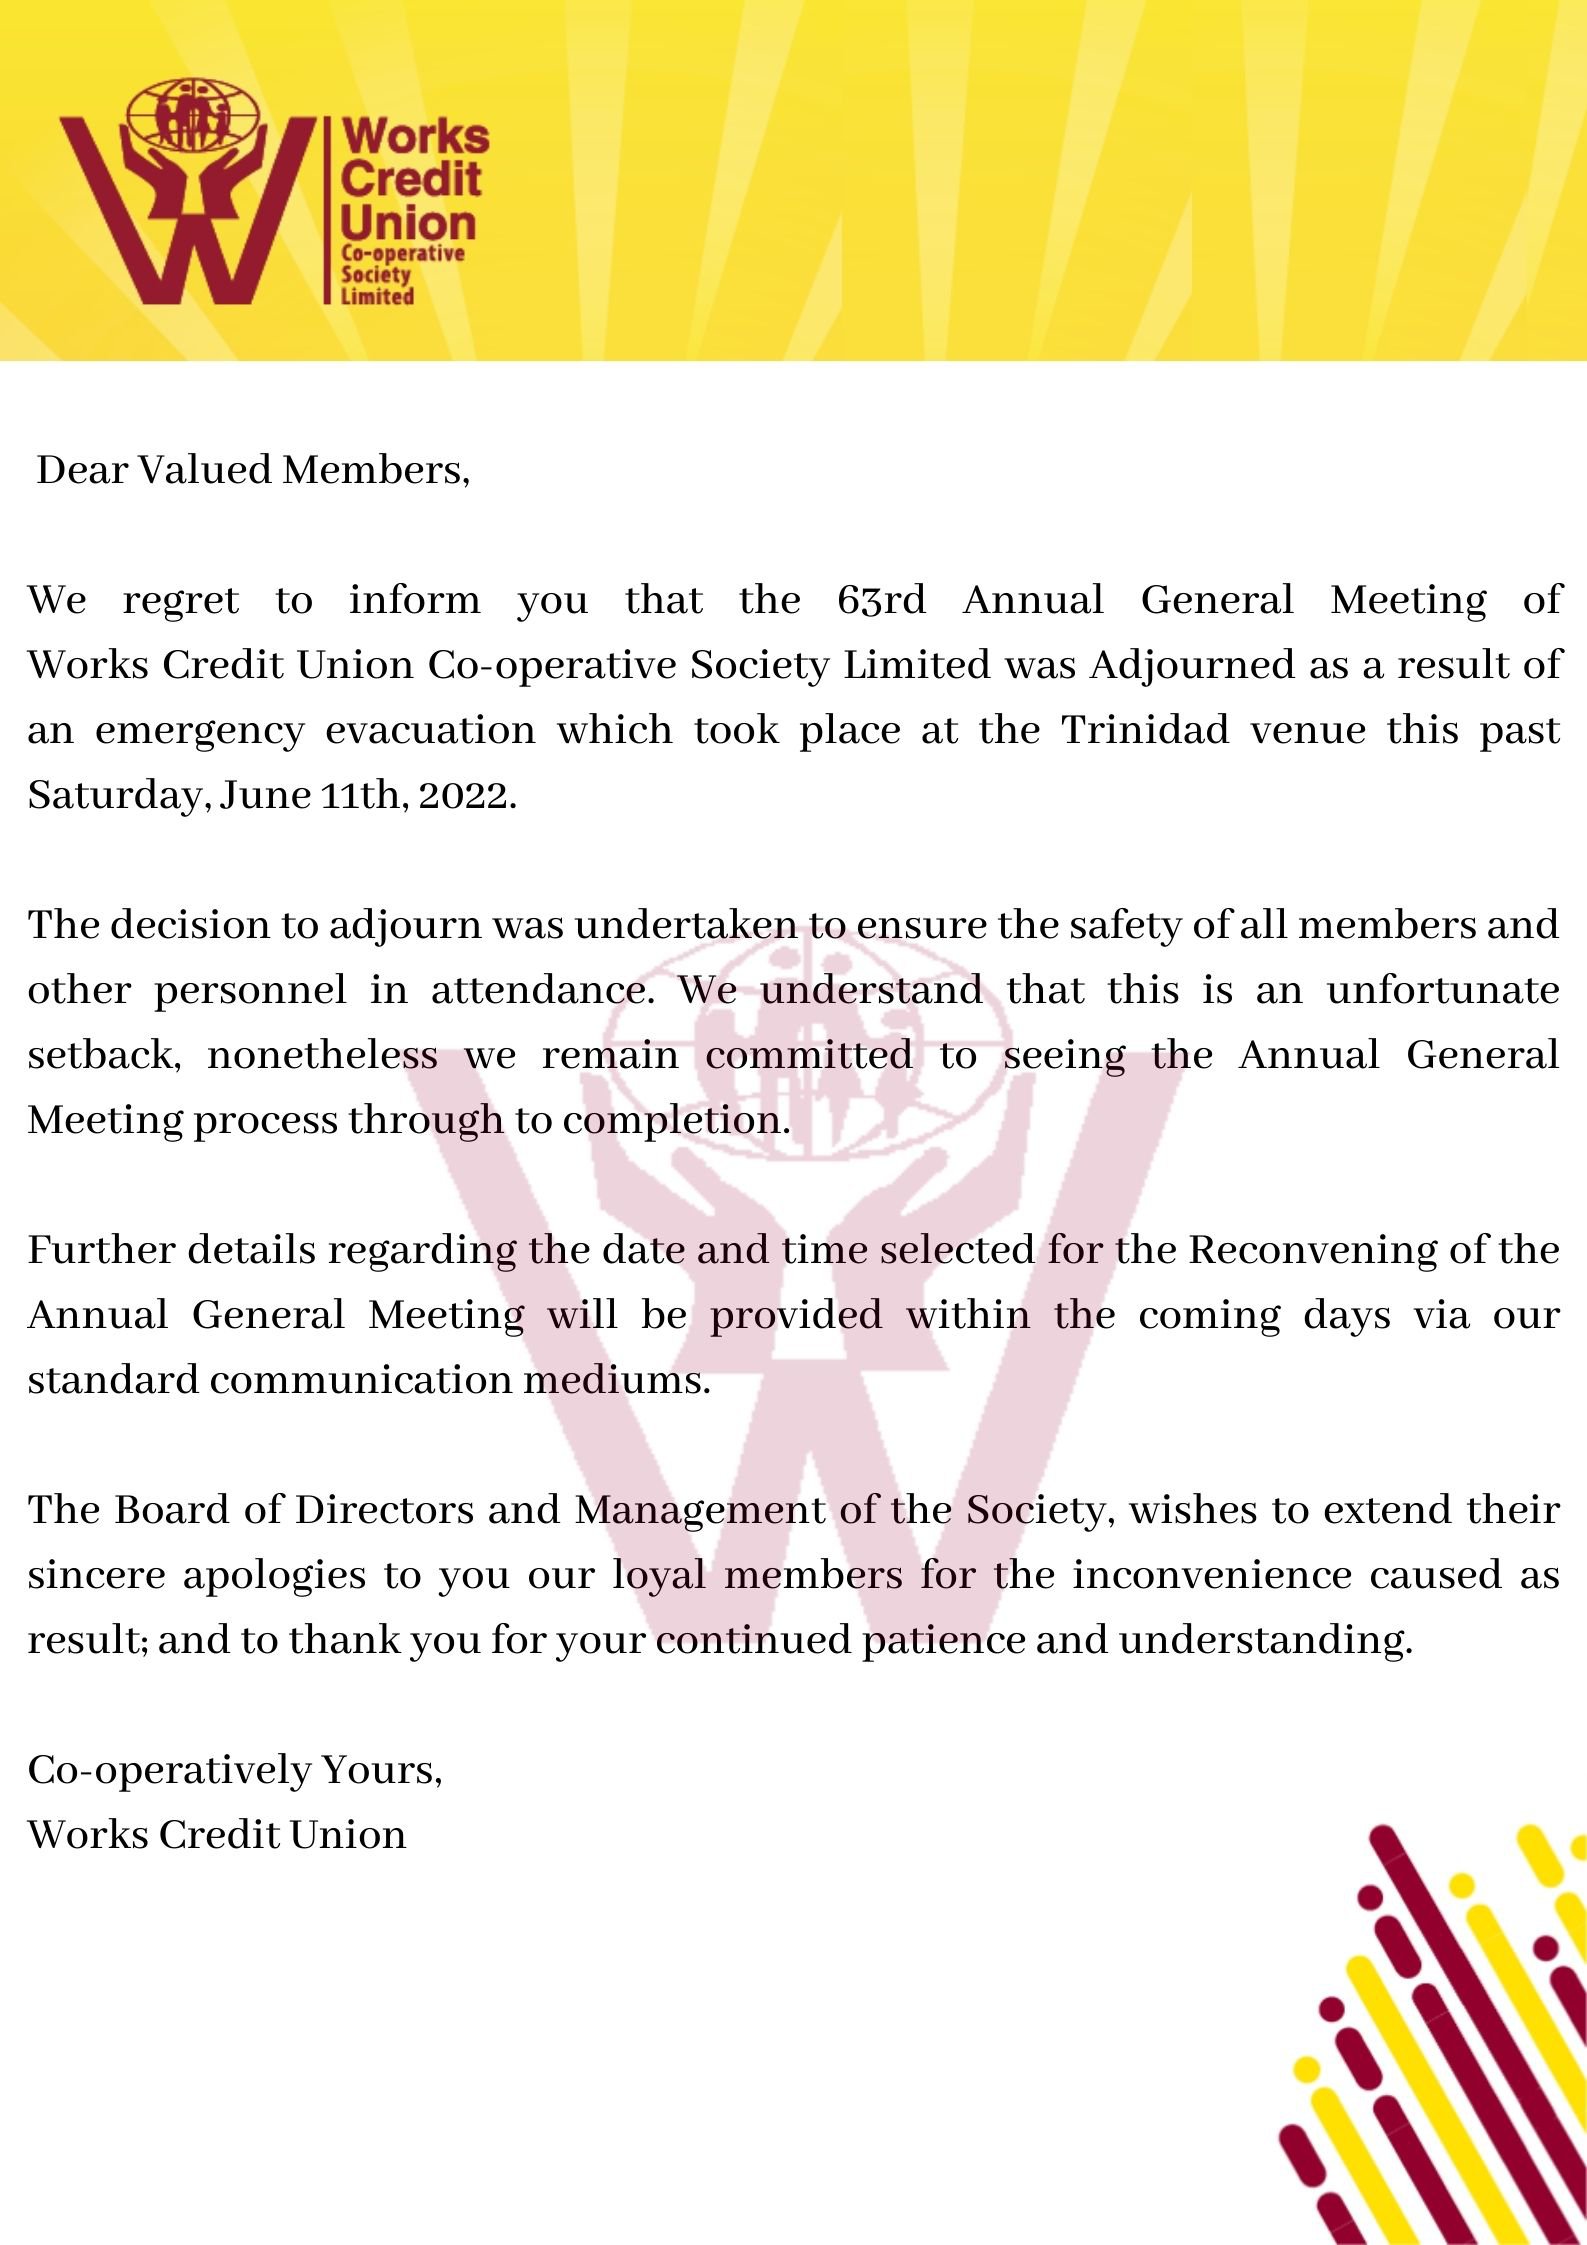 Dear Valued Members, It is our deep regret to inform you that the 62nd Annual General Meeting of Work Credit Union Co-operative Society Limited has been Adjourned due to technical difficulties with our virtual meetin.jpg